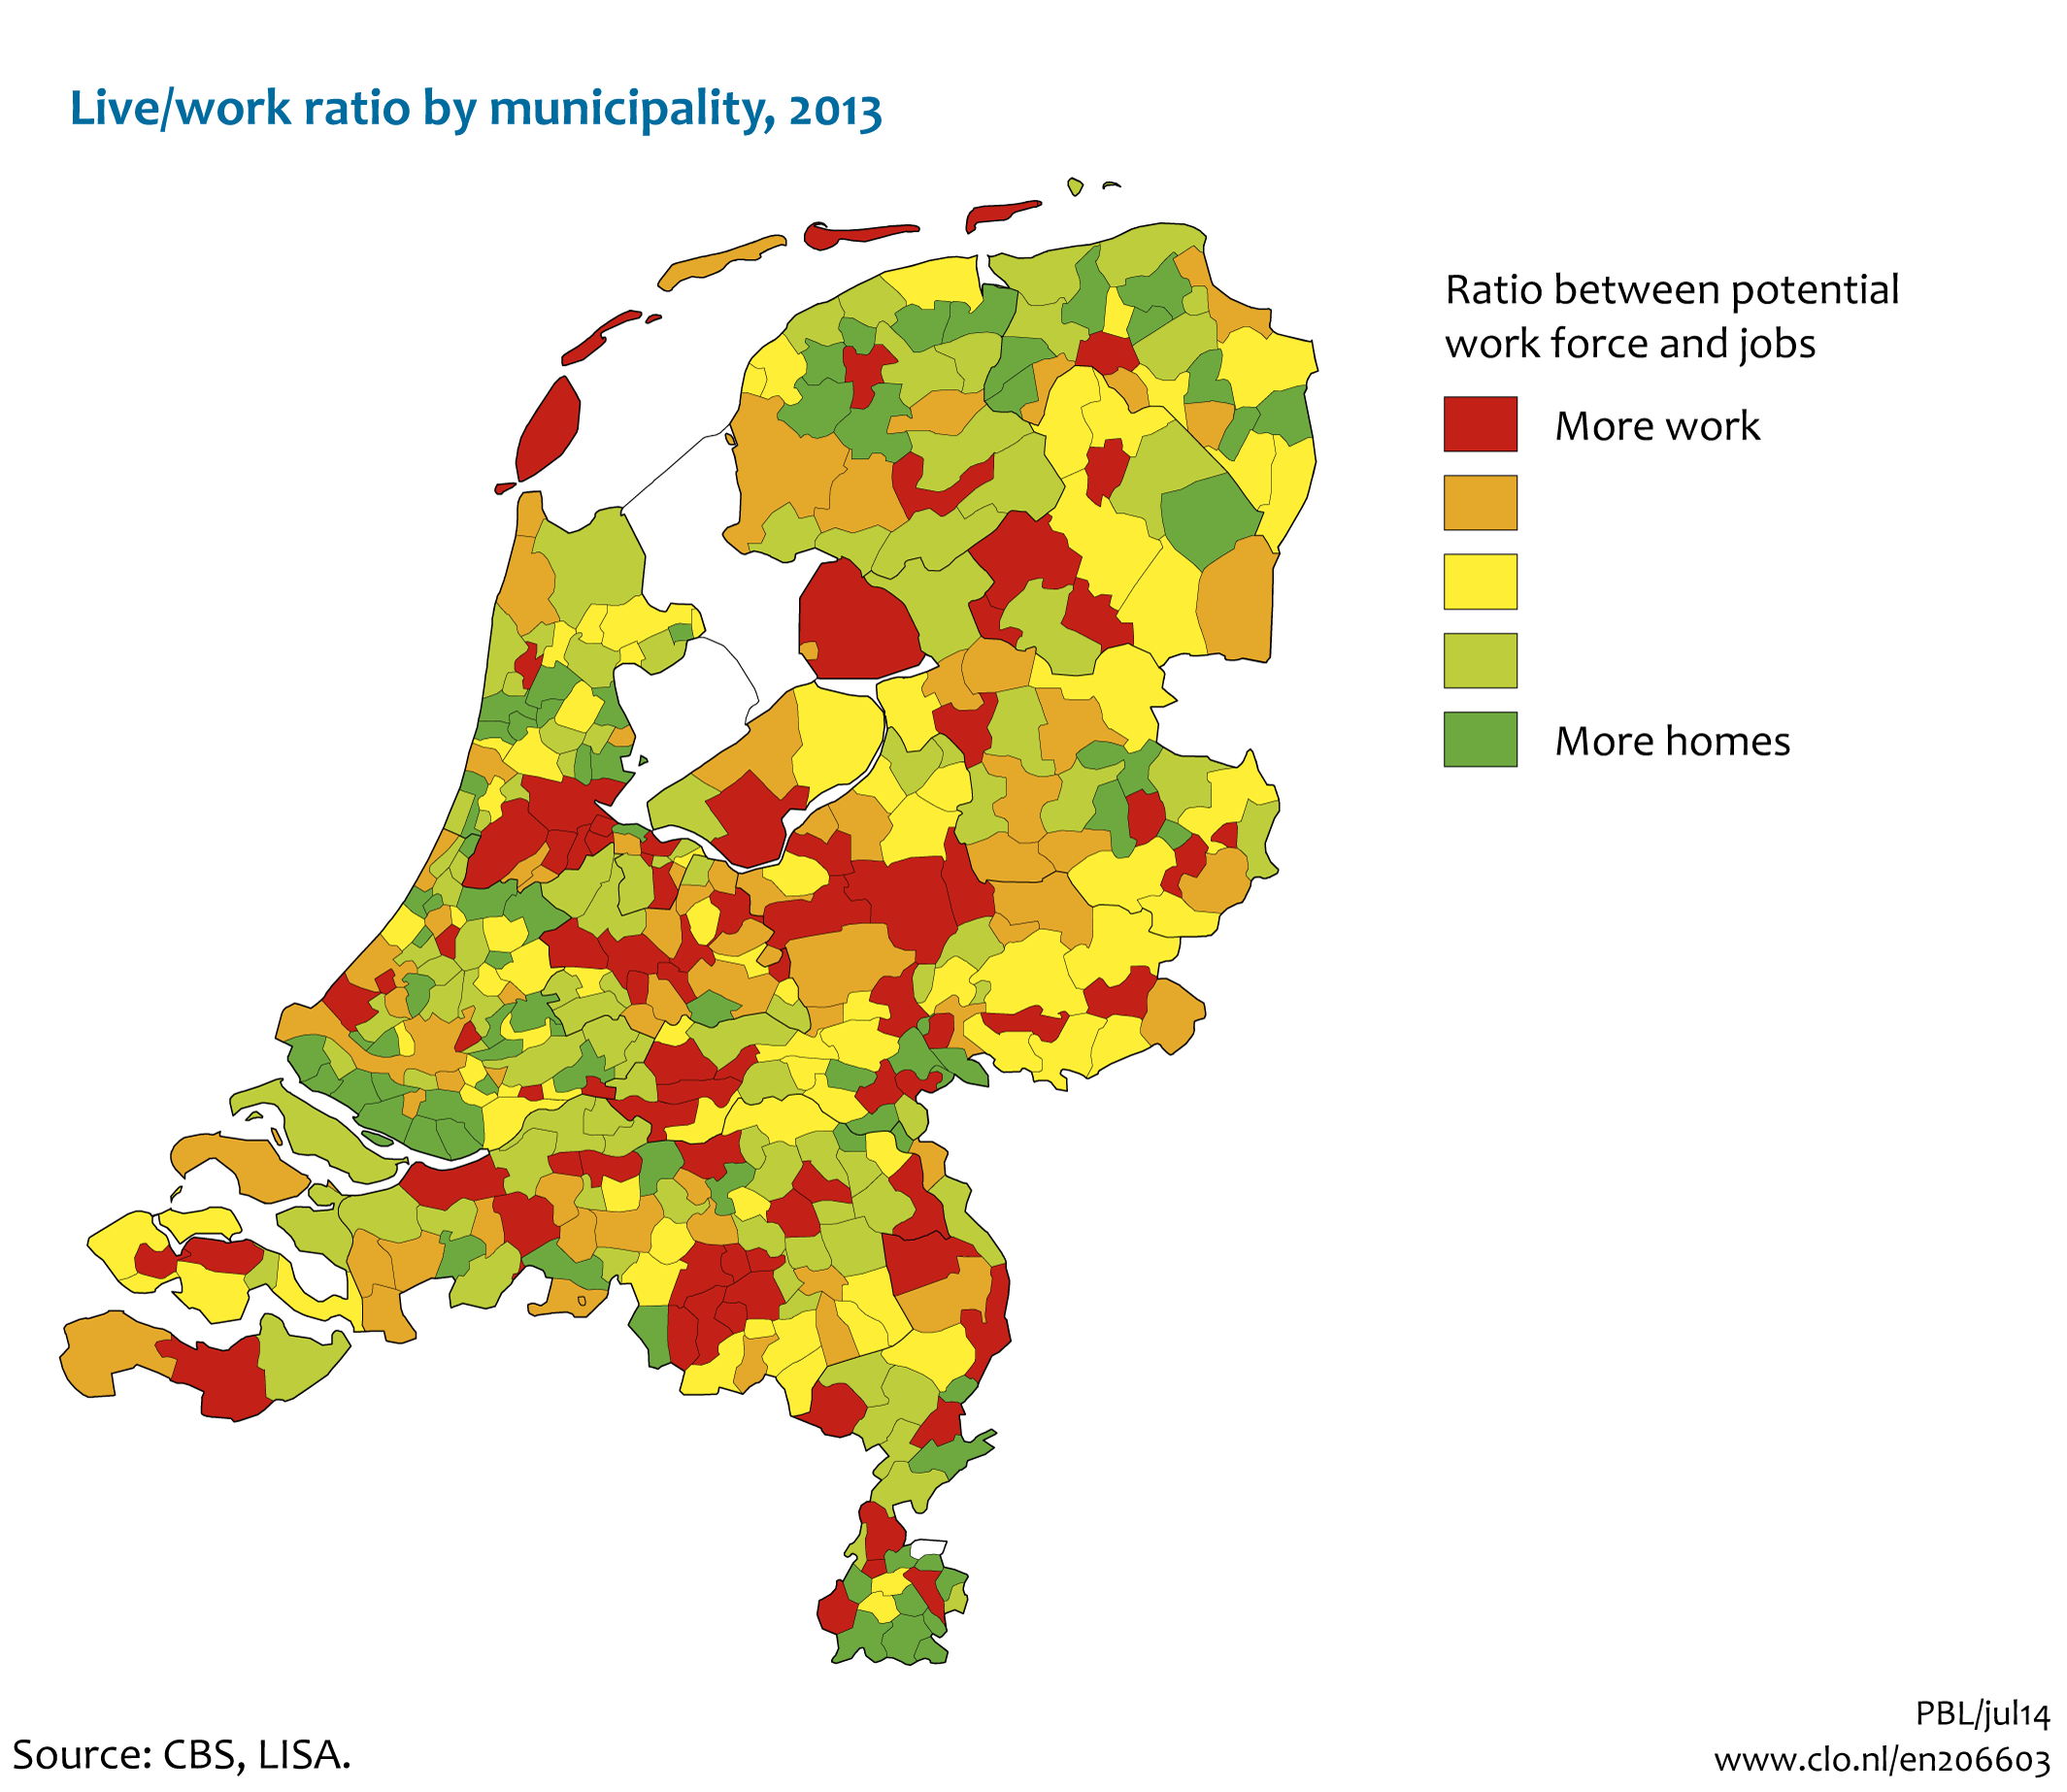 Image Live/work ratio by municipality. The image is further explained in the text.